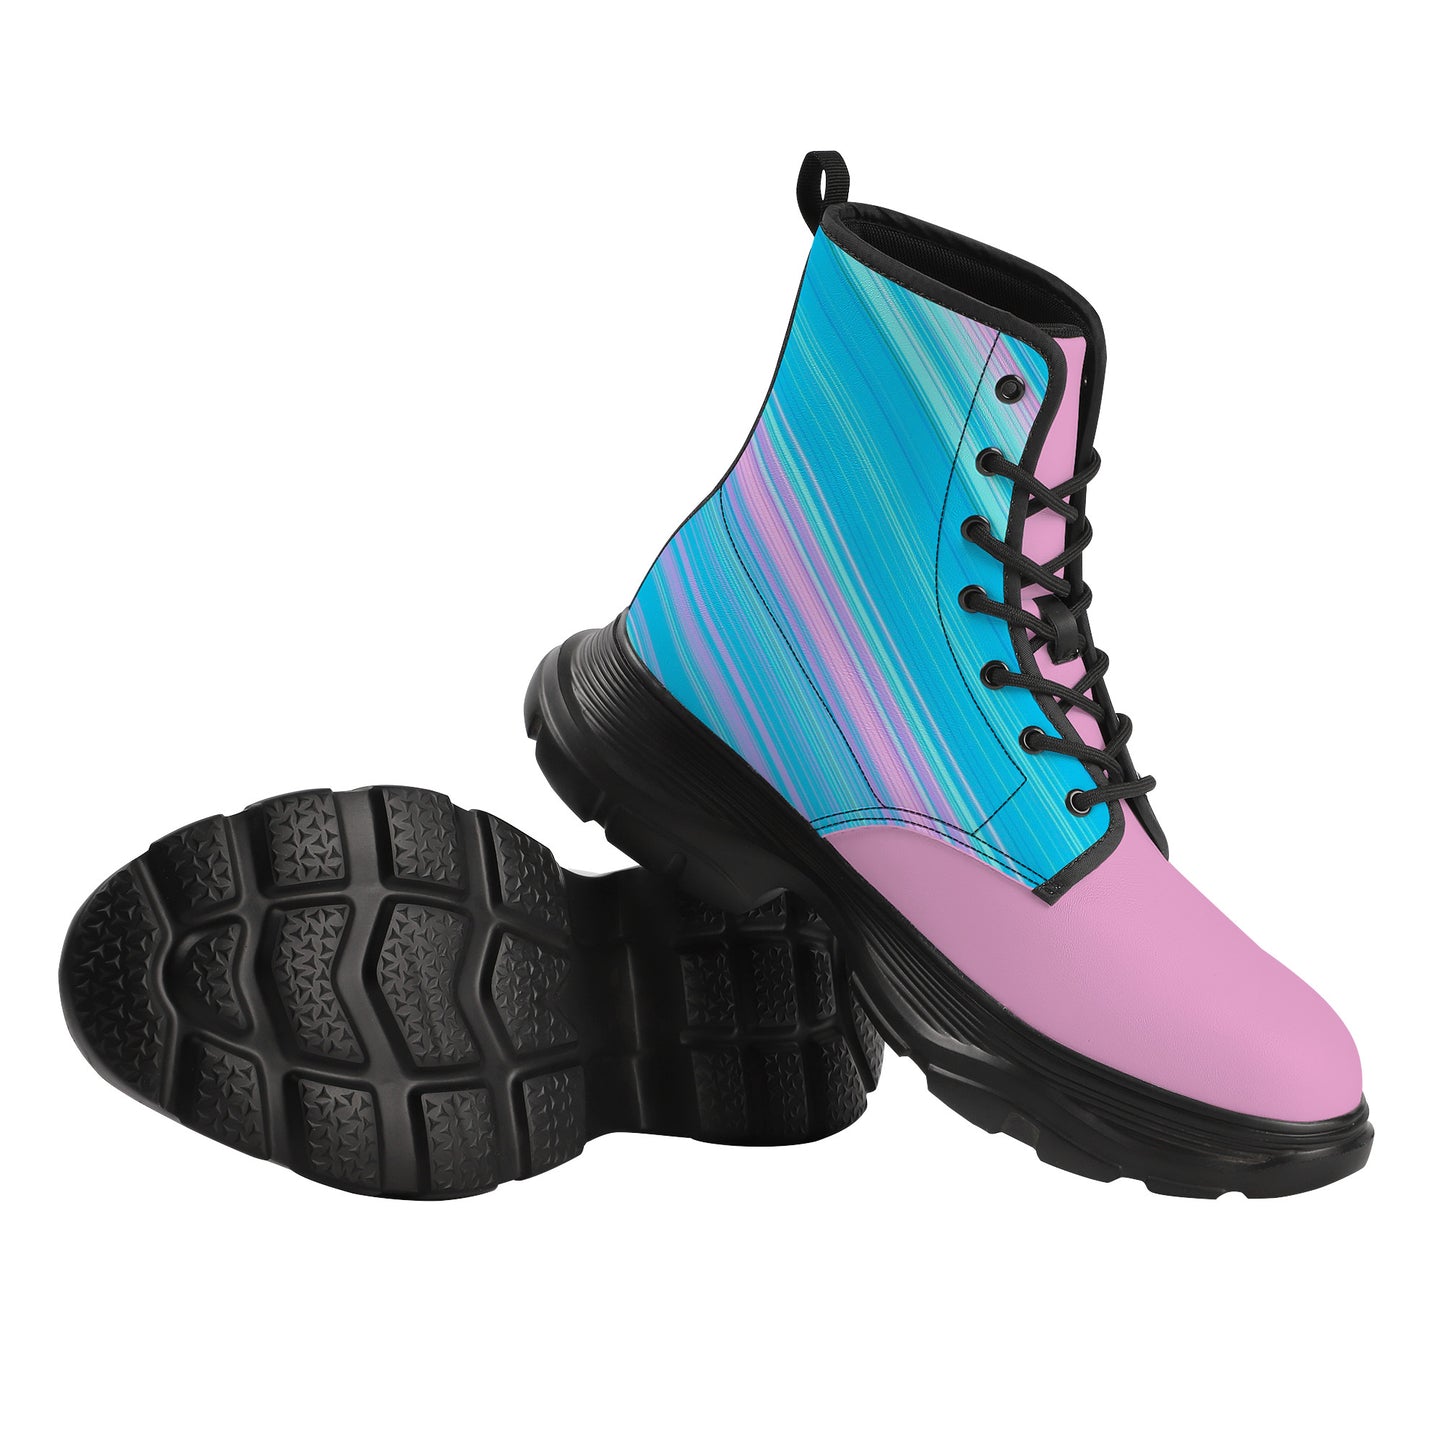 Unisex Chunky Boots - Blue/Pink